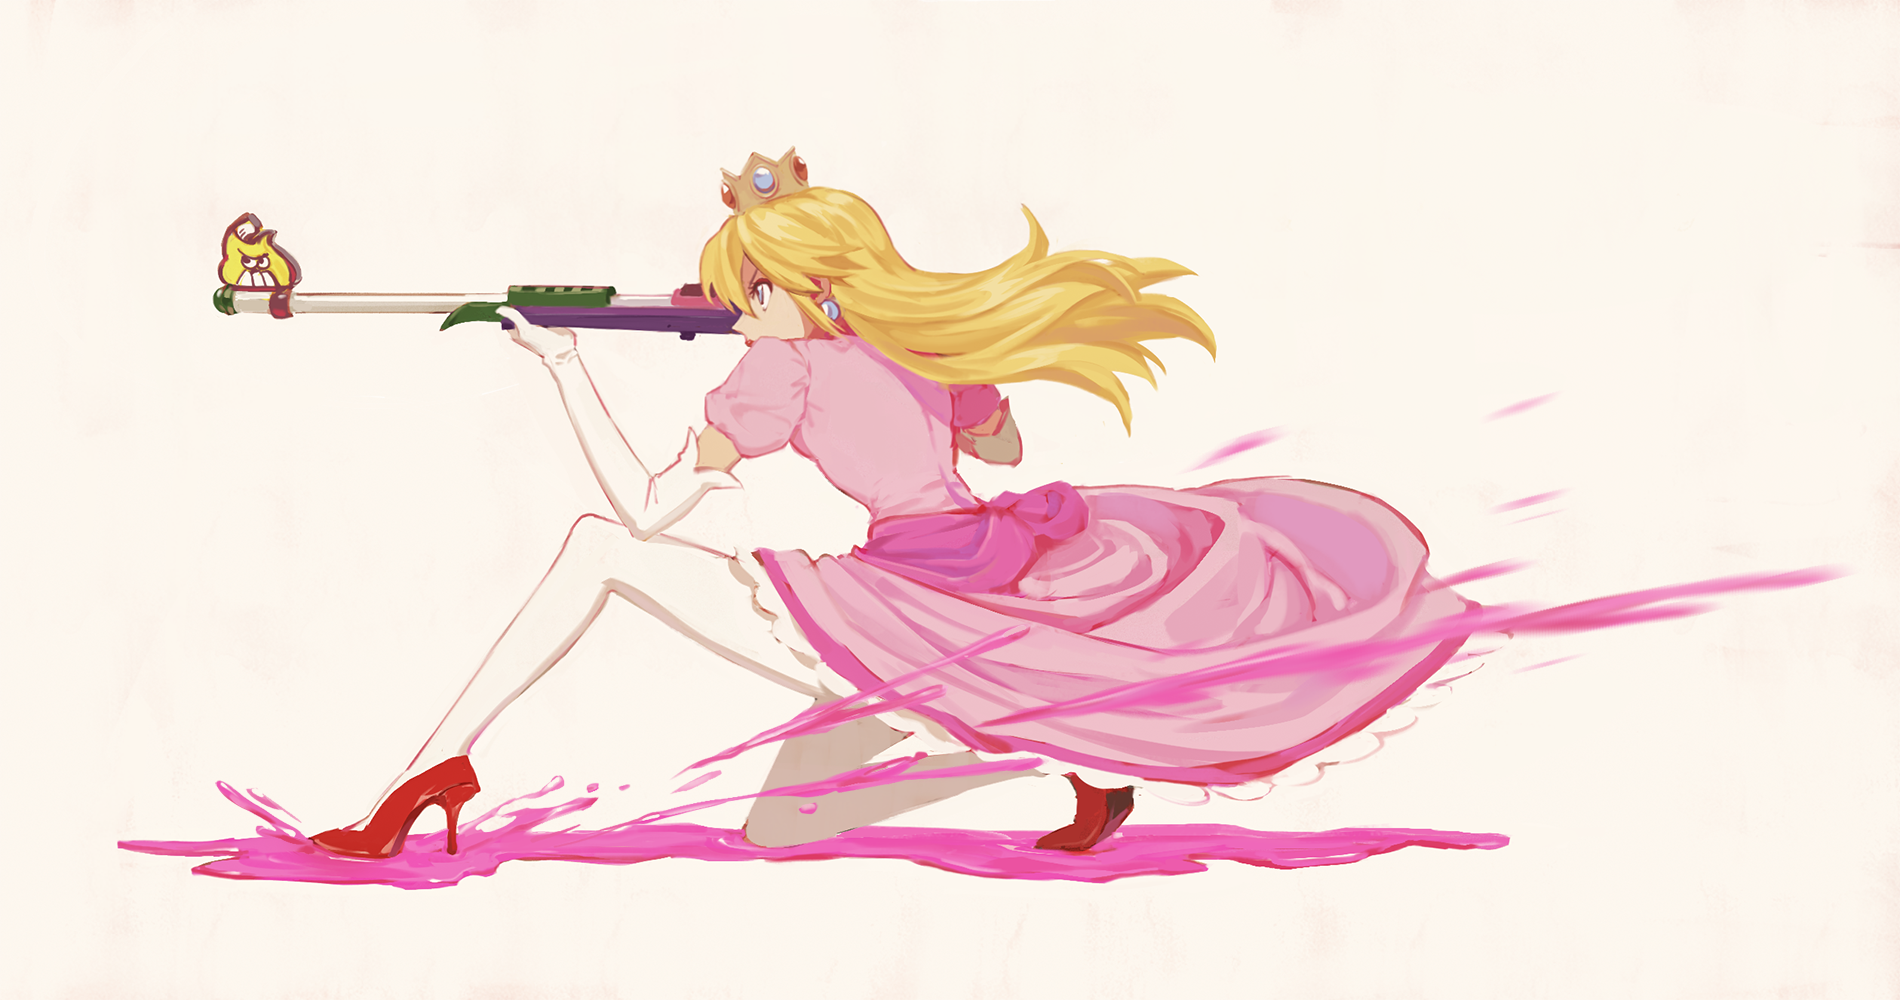 Anime 1900x1000 girls with guns Princess Peach fan art Nintendo pink dress dress video game girls video games video game characters white background simple background long hair rifles aiming pink clothing heels red heels